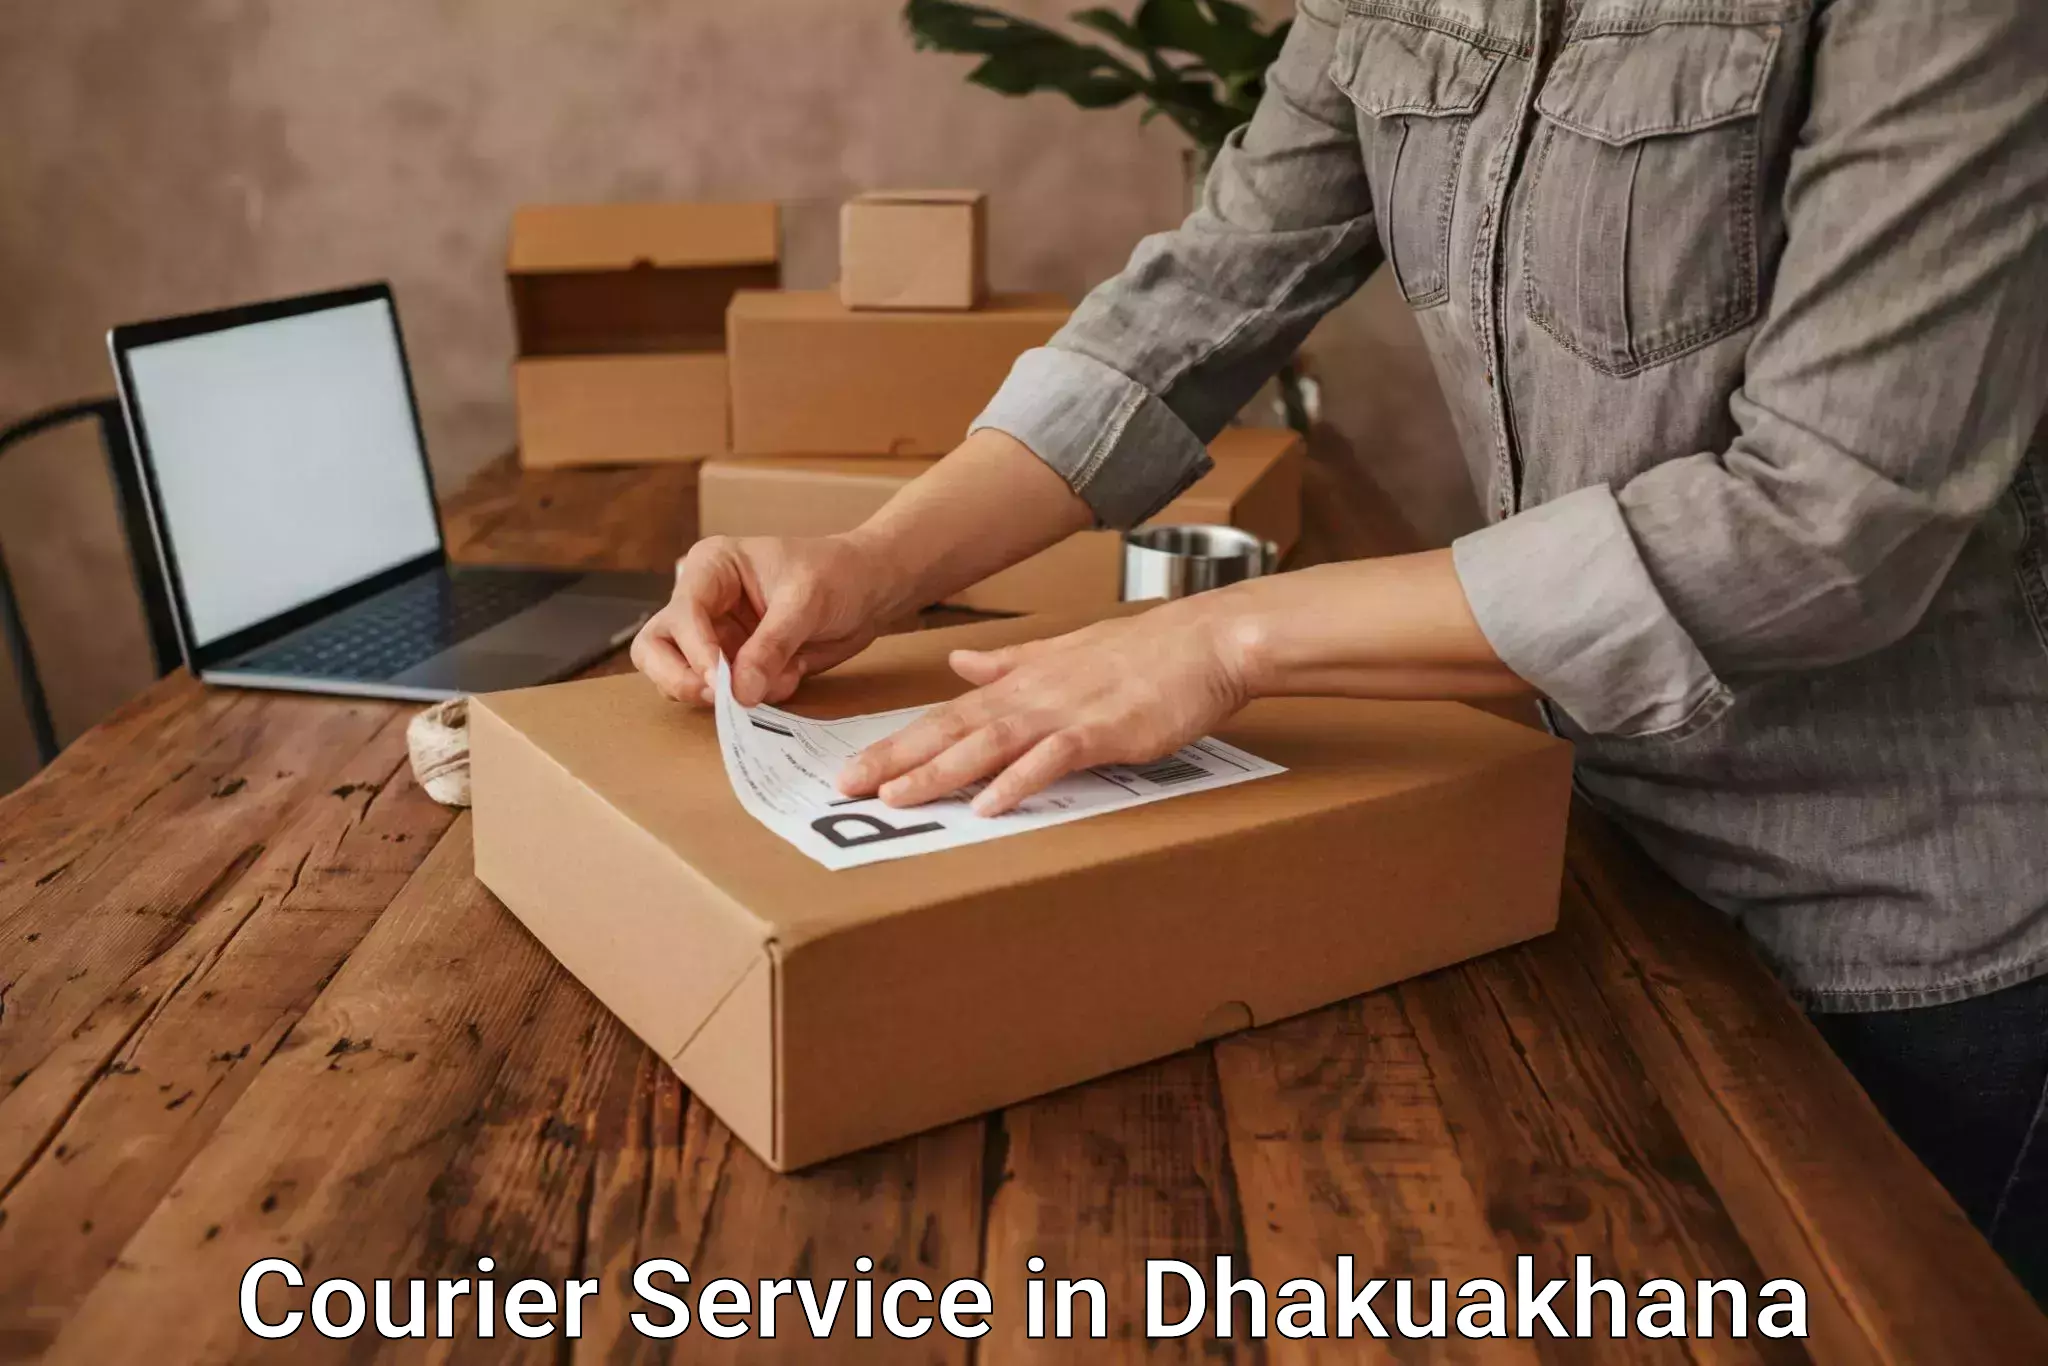 Versatile courier offerings in Dhakuakhana